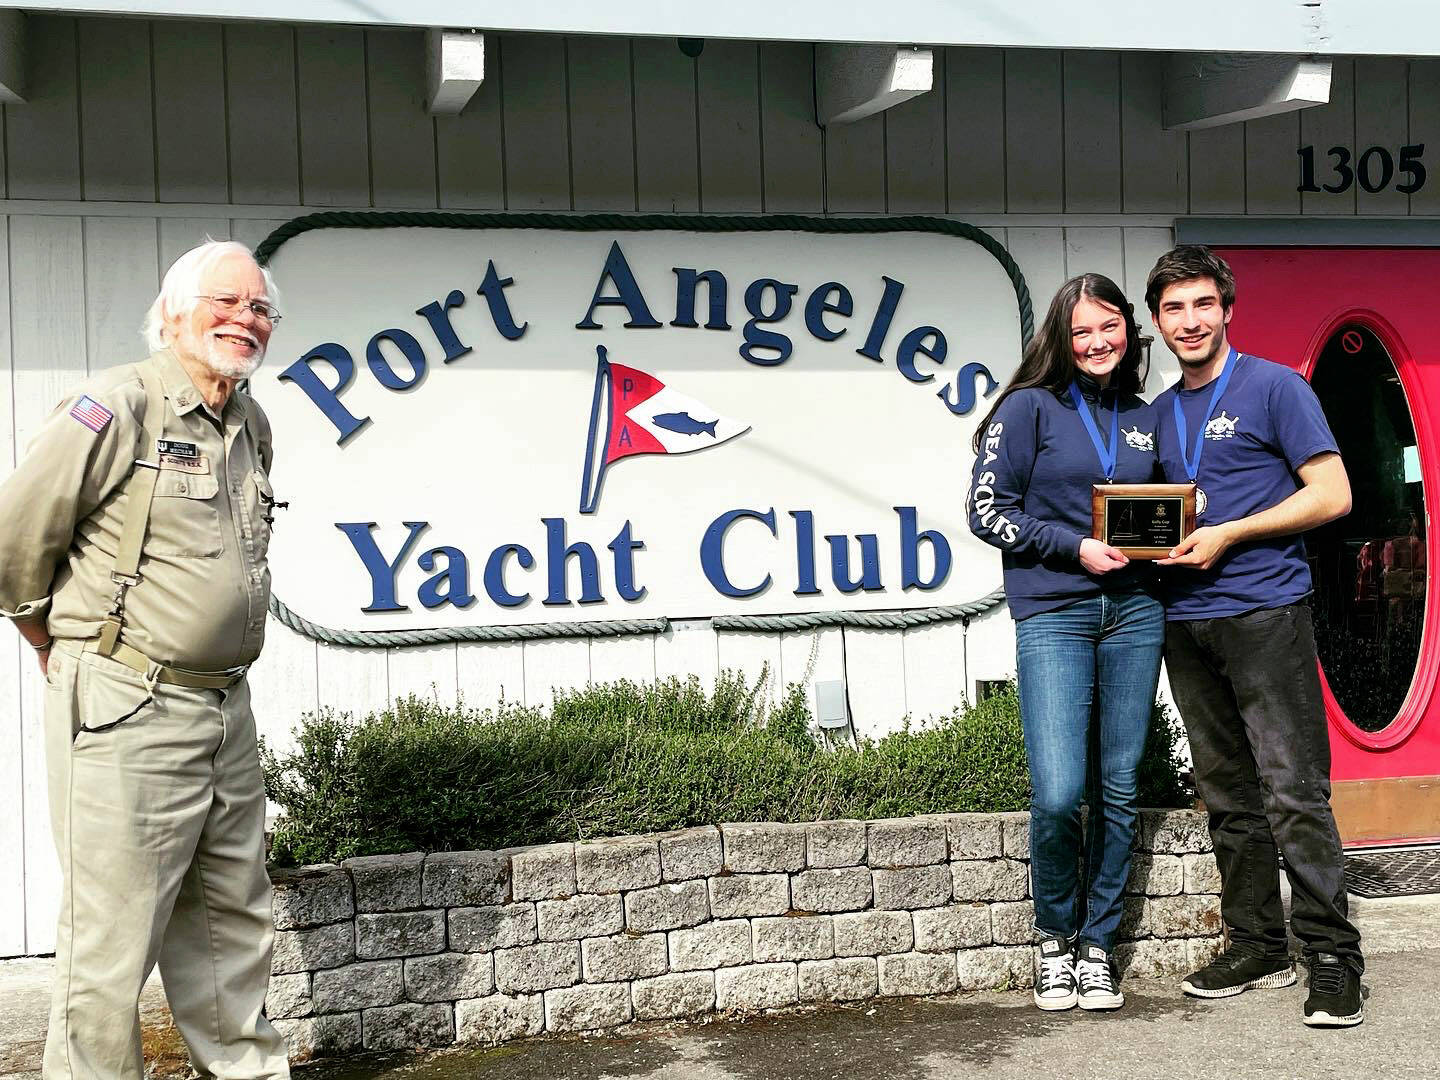 Sailors Ella Schultz, middle, and Ozzy Minard earned a first-place finish in the first Kelly Cup Regatta hosted by the Sea Scout Ship Marvin Shields and the Port Angeles Yacht Club (represented by Doug Mecham).